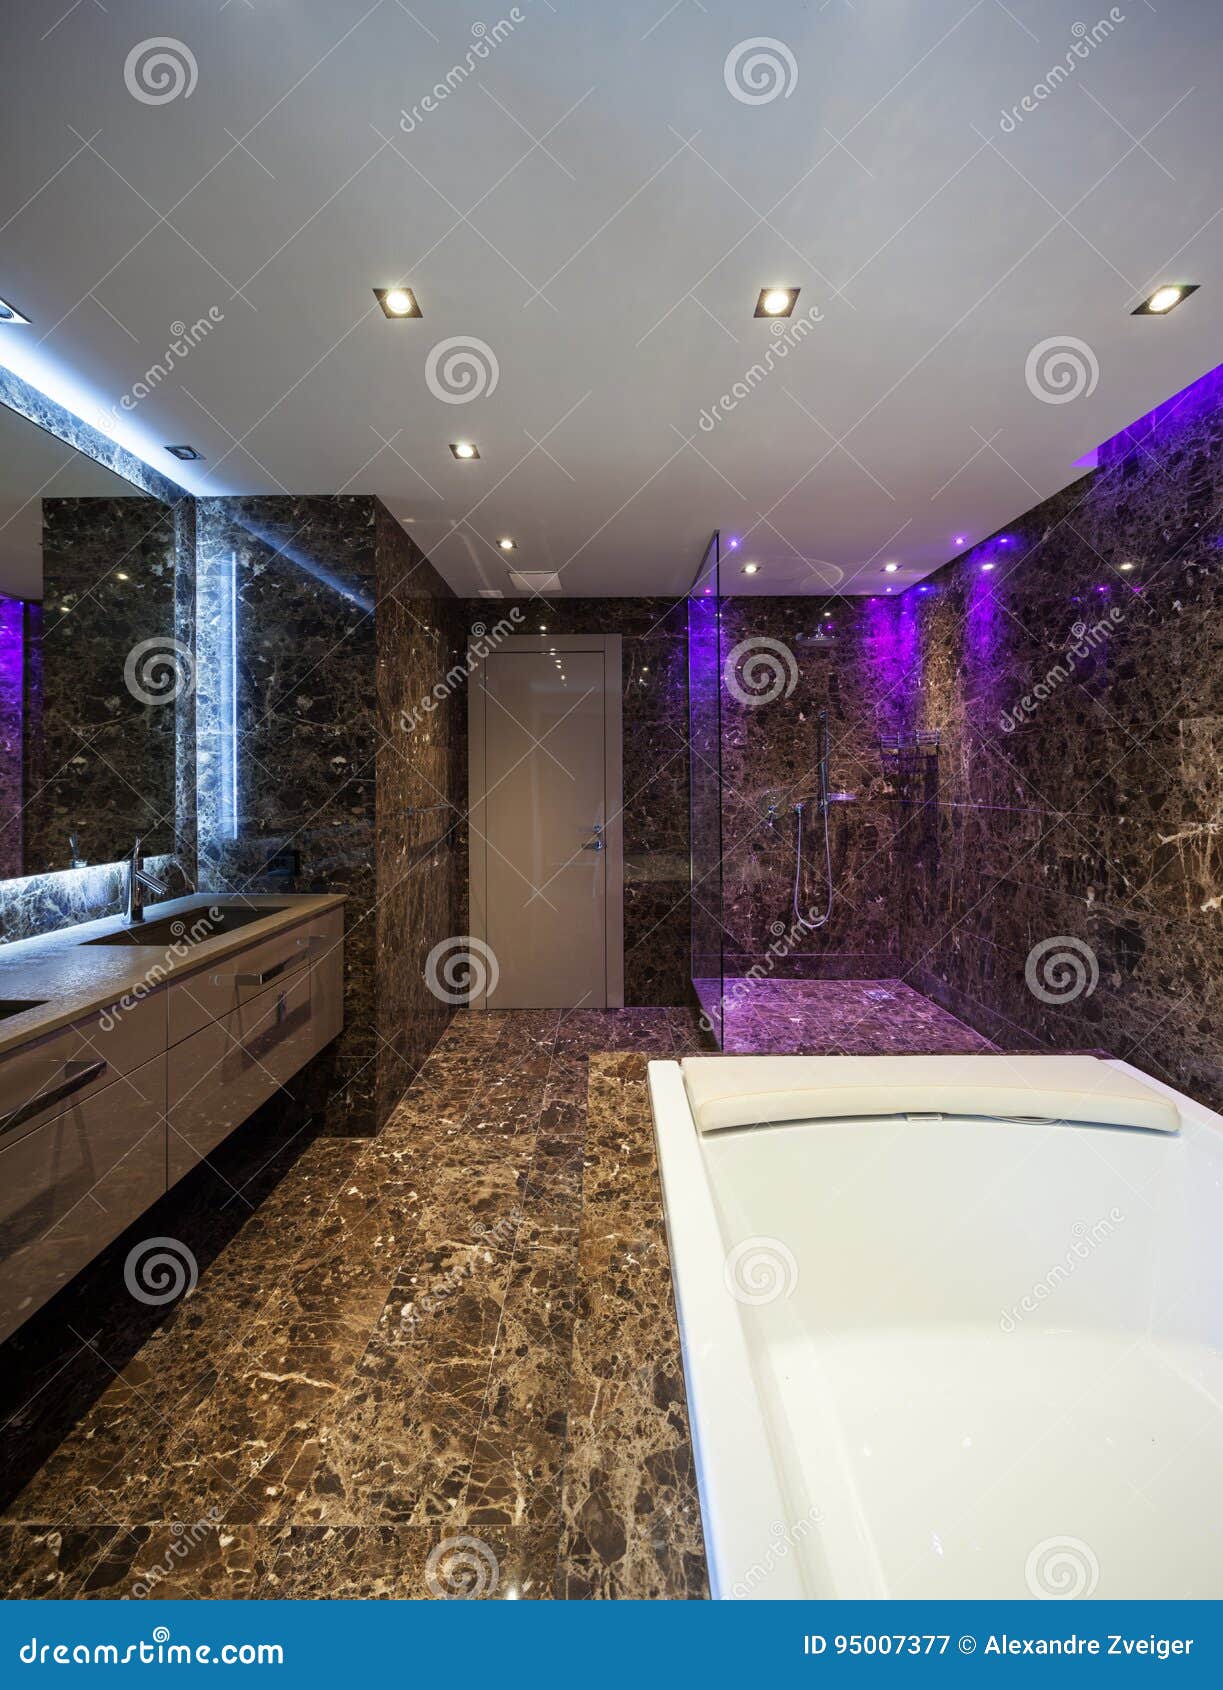 Luxury Bathroom In A Modern House Stock Image Image Of